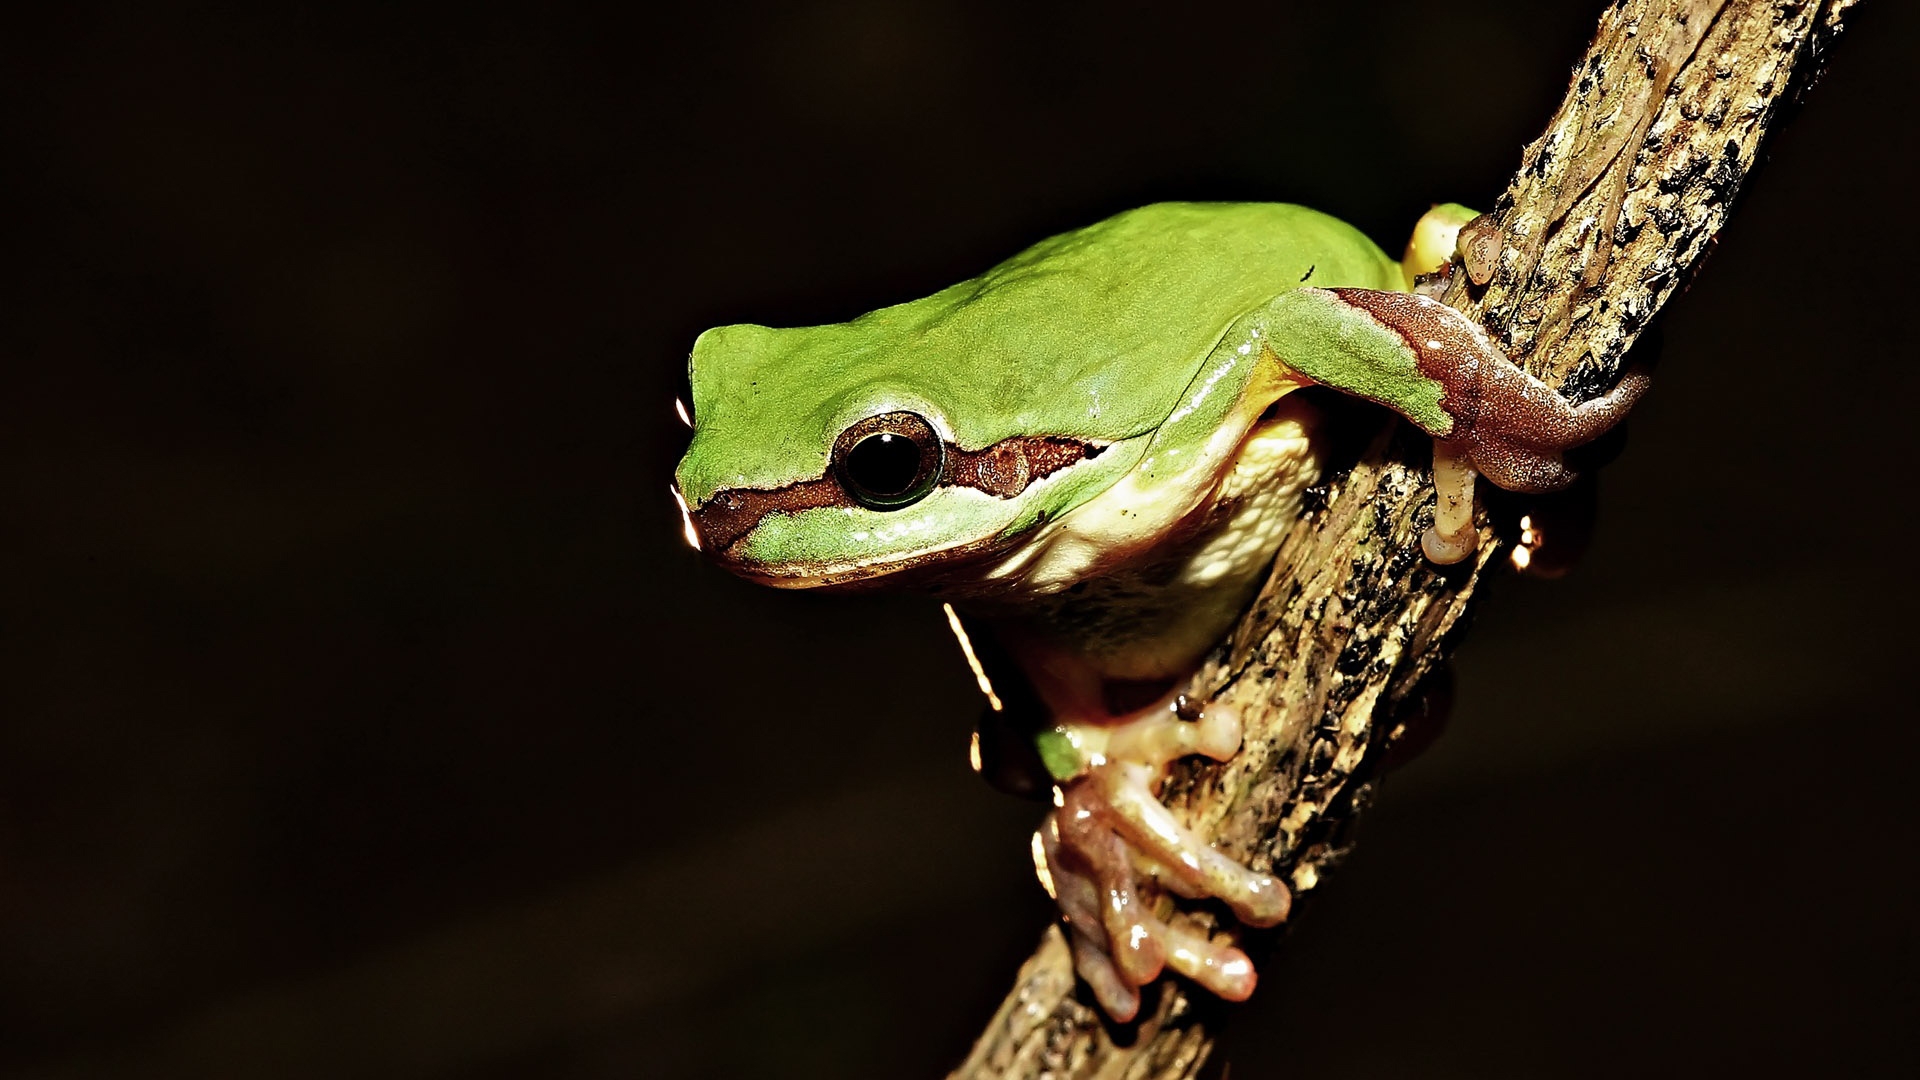 Frog on tree   High Definition Wallpapers   HD wallpapers